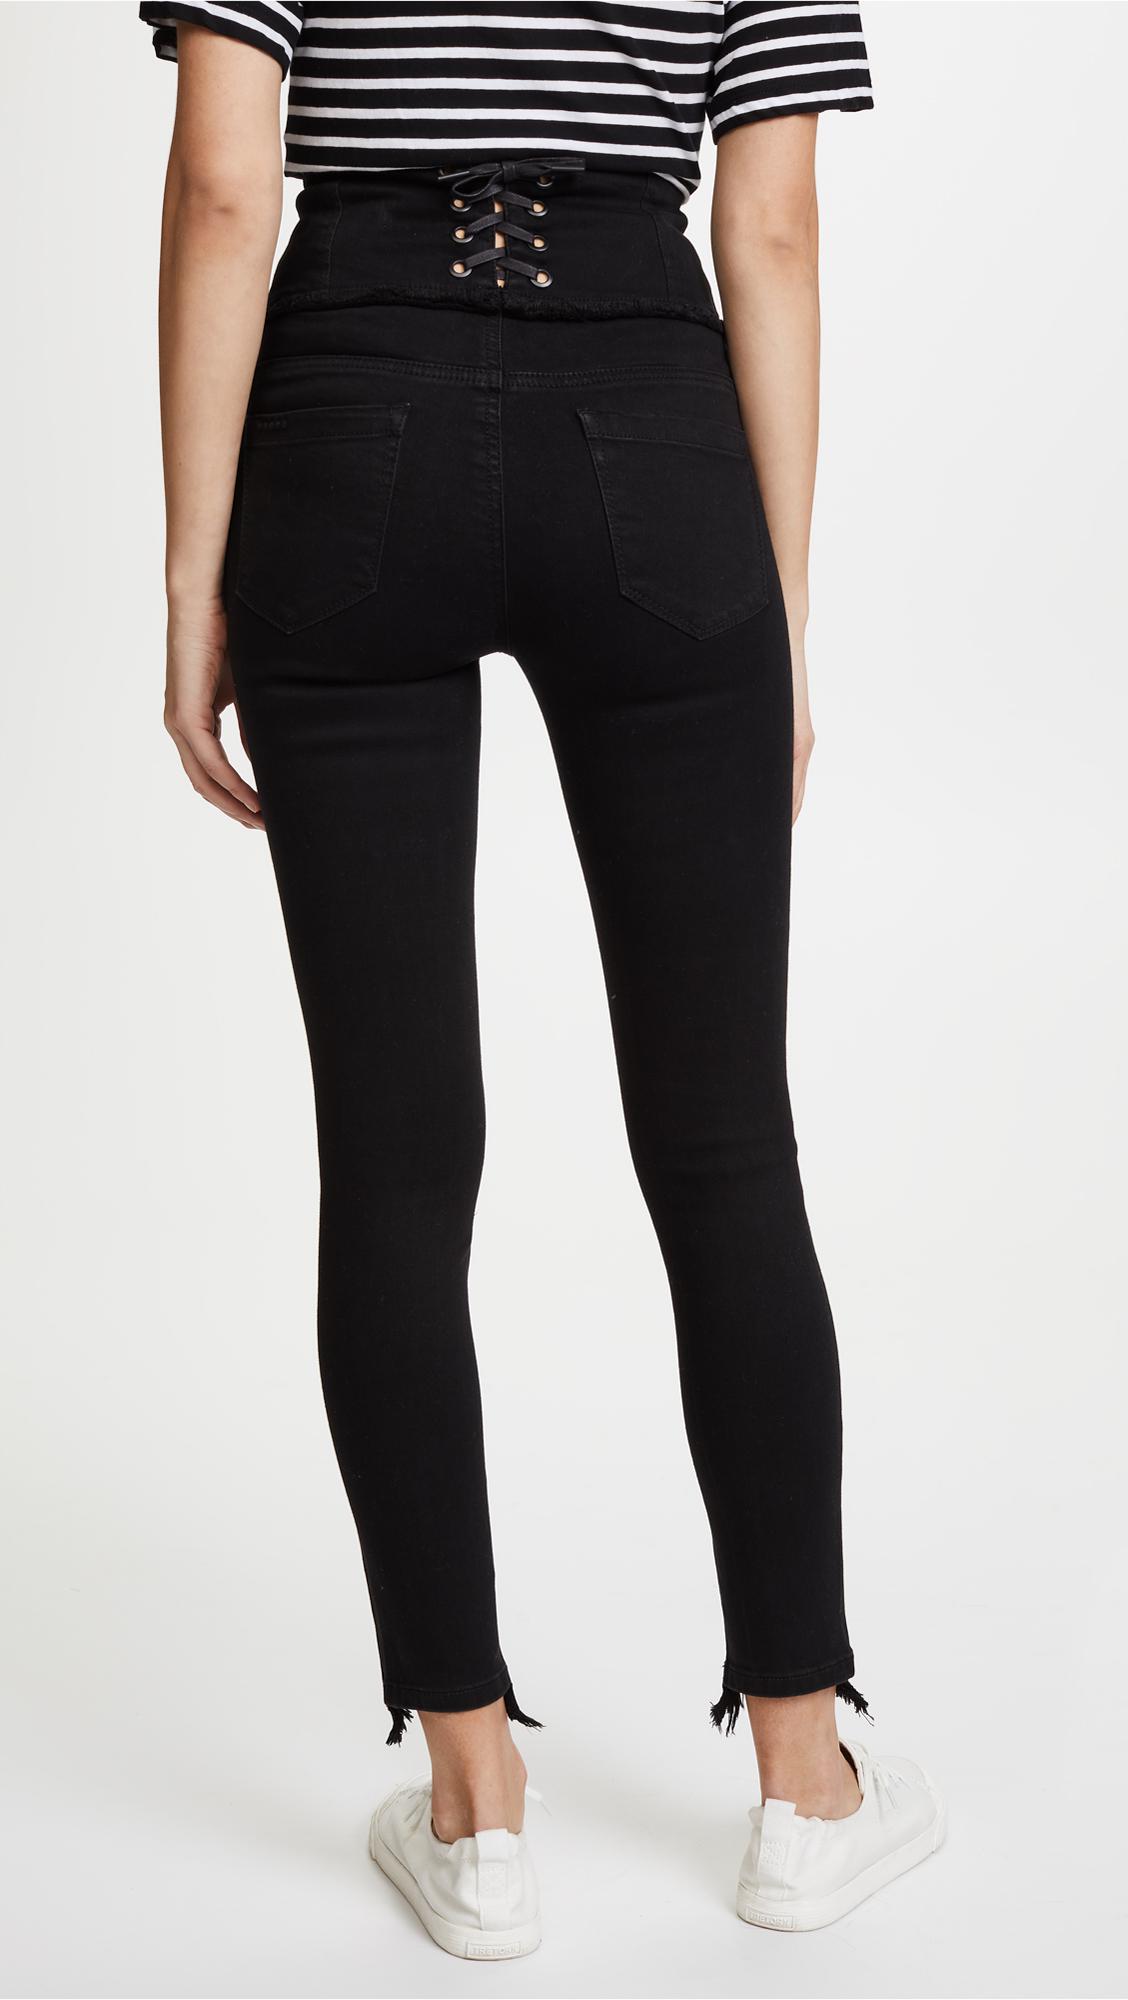 Blank NYC High Rise Corset Skinny Jeans in Black - Lyst